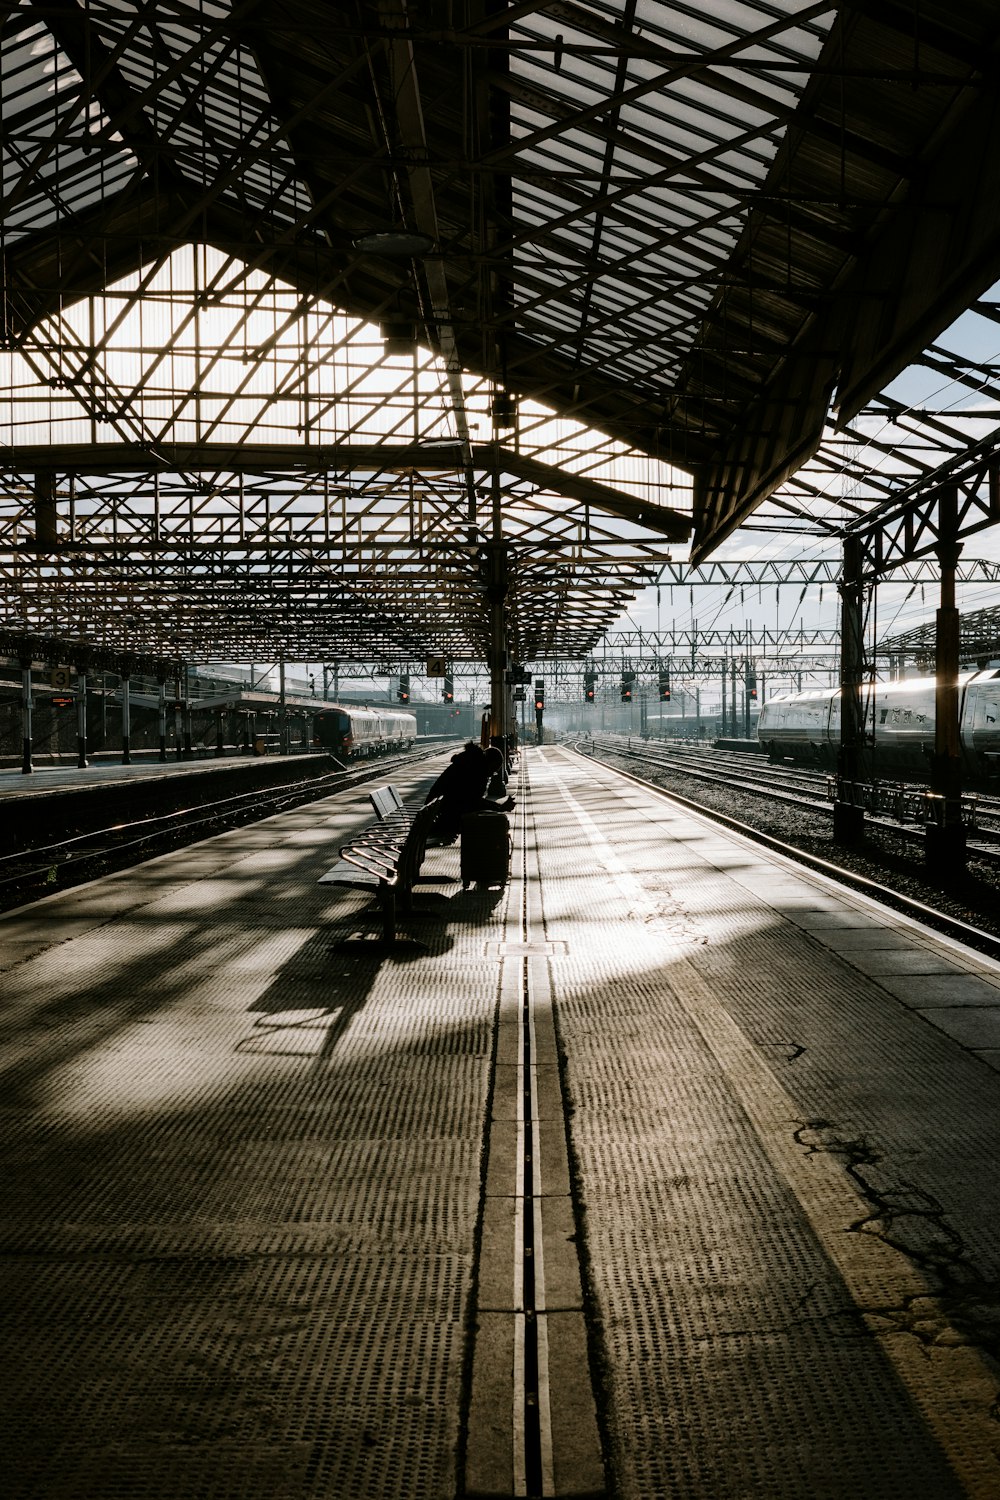 a person sitting on a bench at a train station